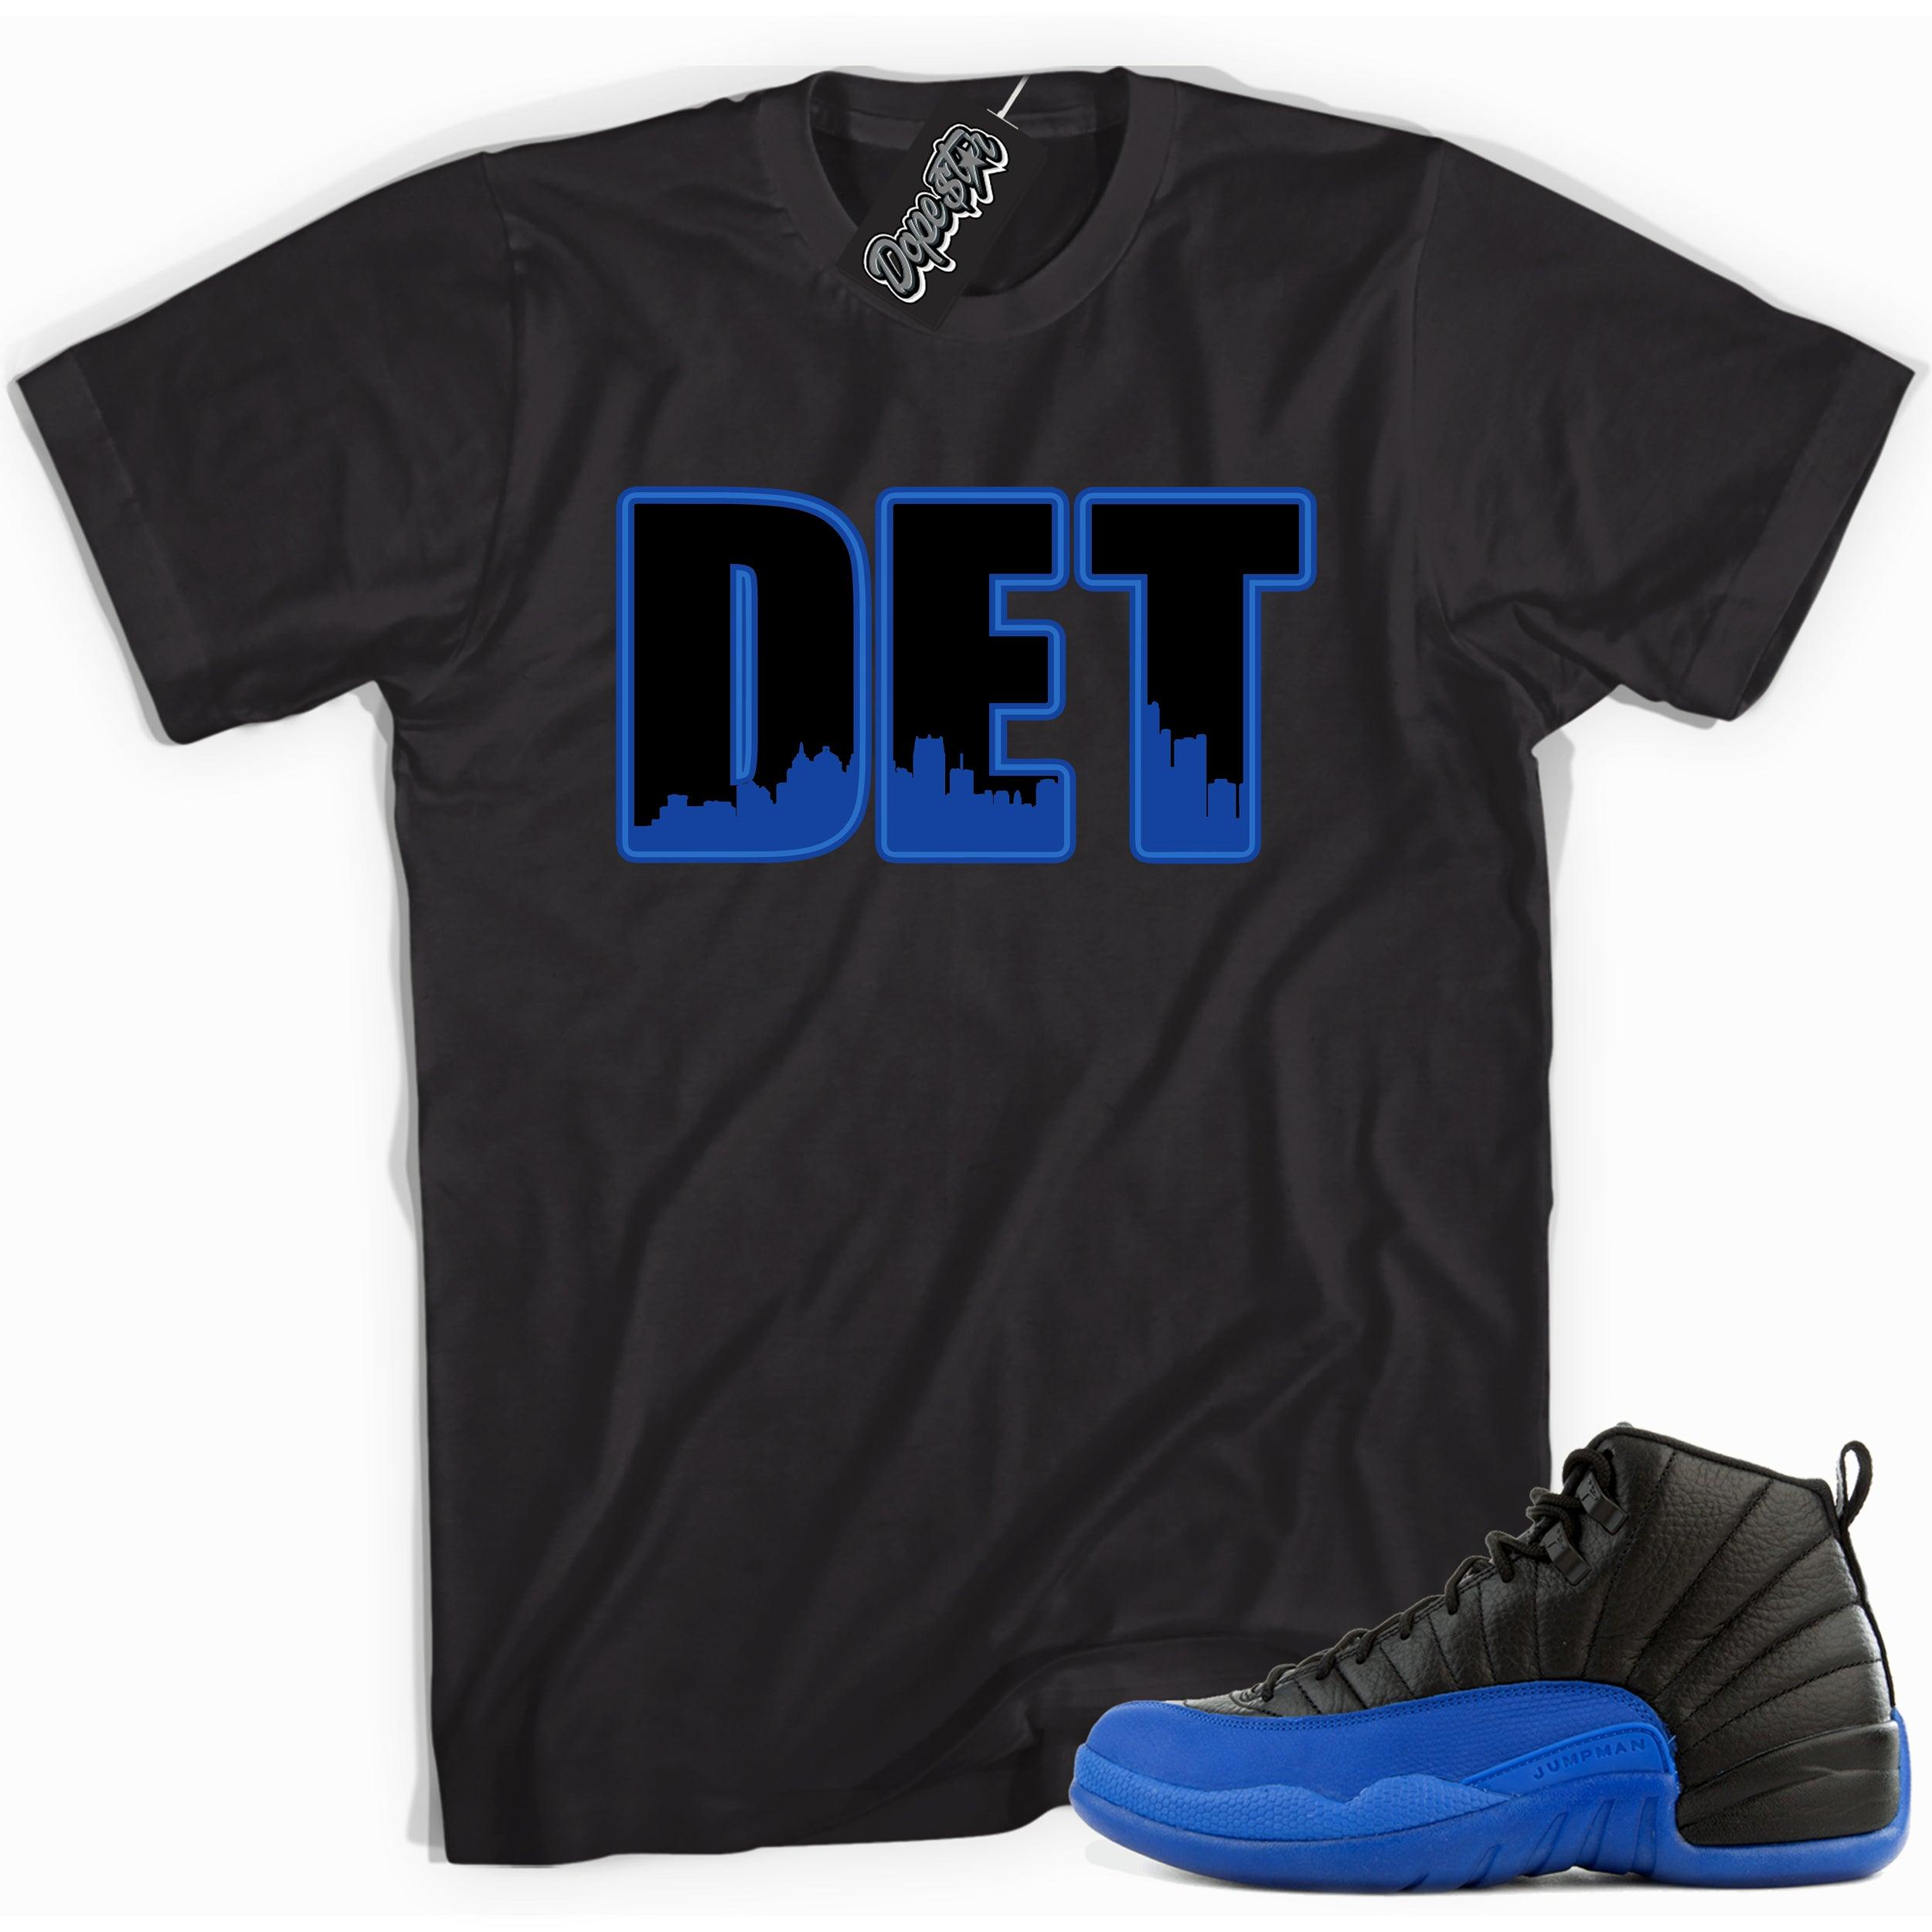 Cool black graphic tee with 'det' print, that perfectly matches  Air Jordan 12 Retro Black Game Royal sneakers.